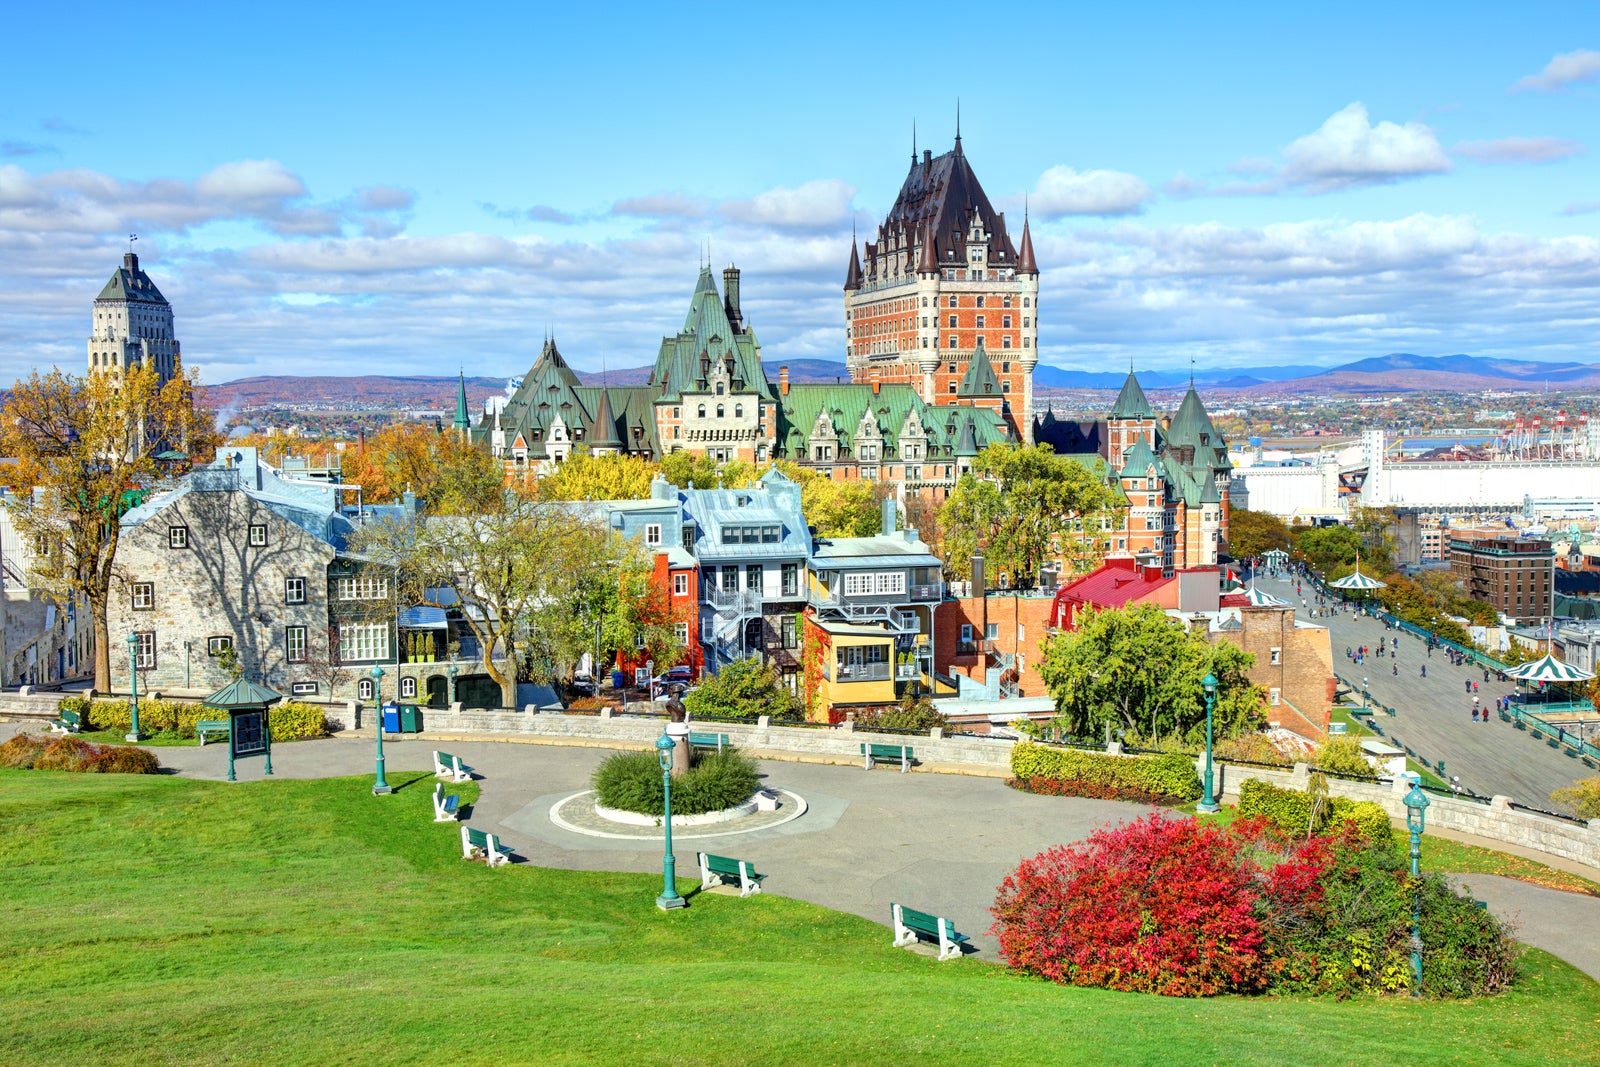 Old Quebec is a historic neighborhood of Quebec City, Quebec, Canada